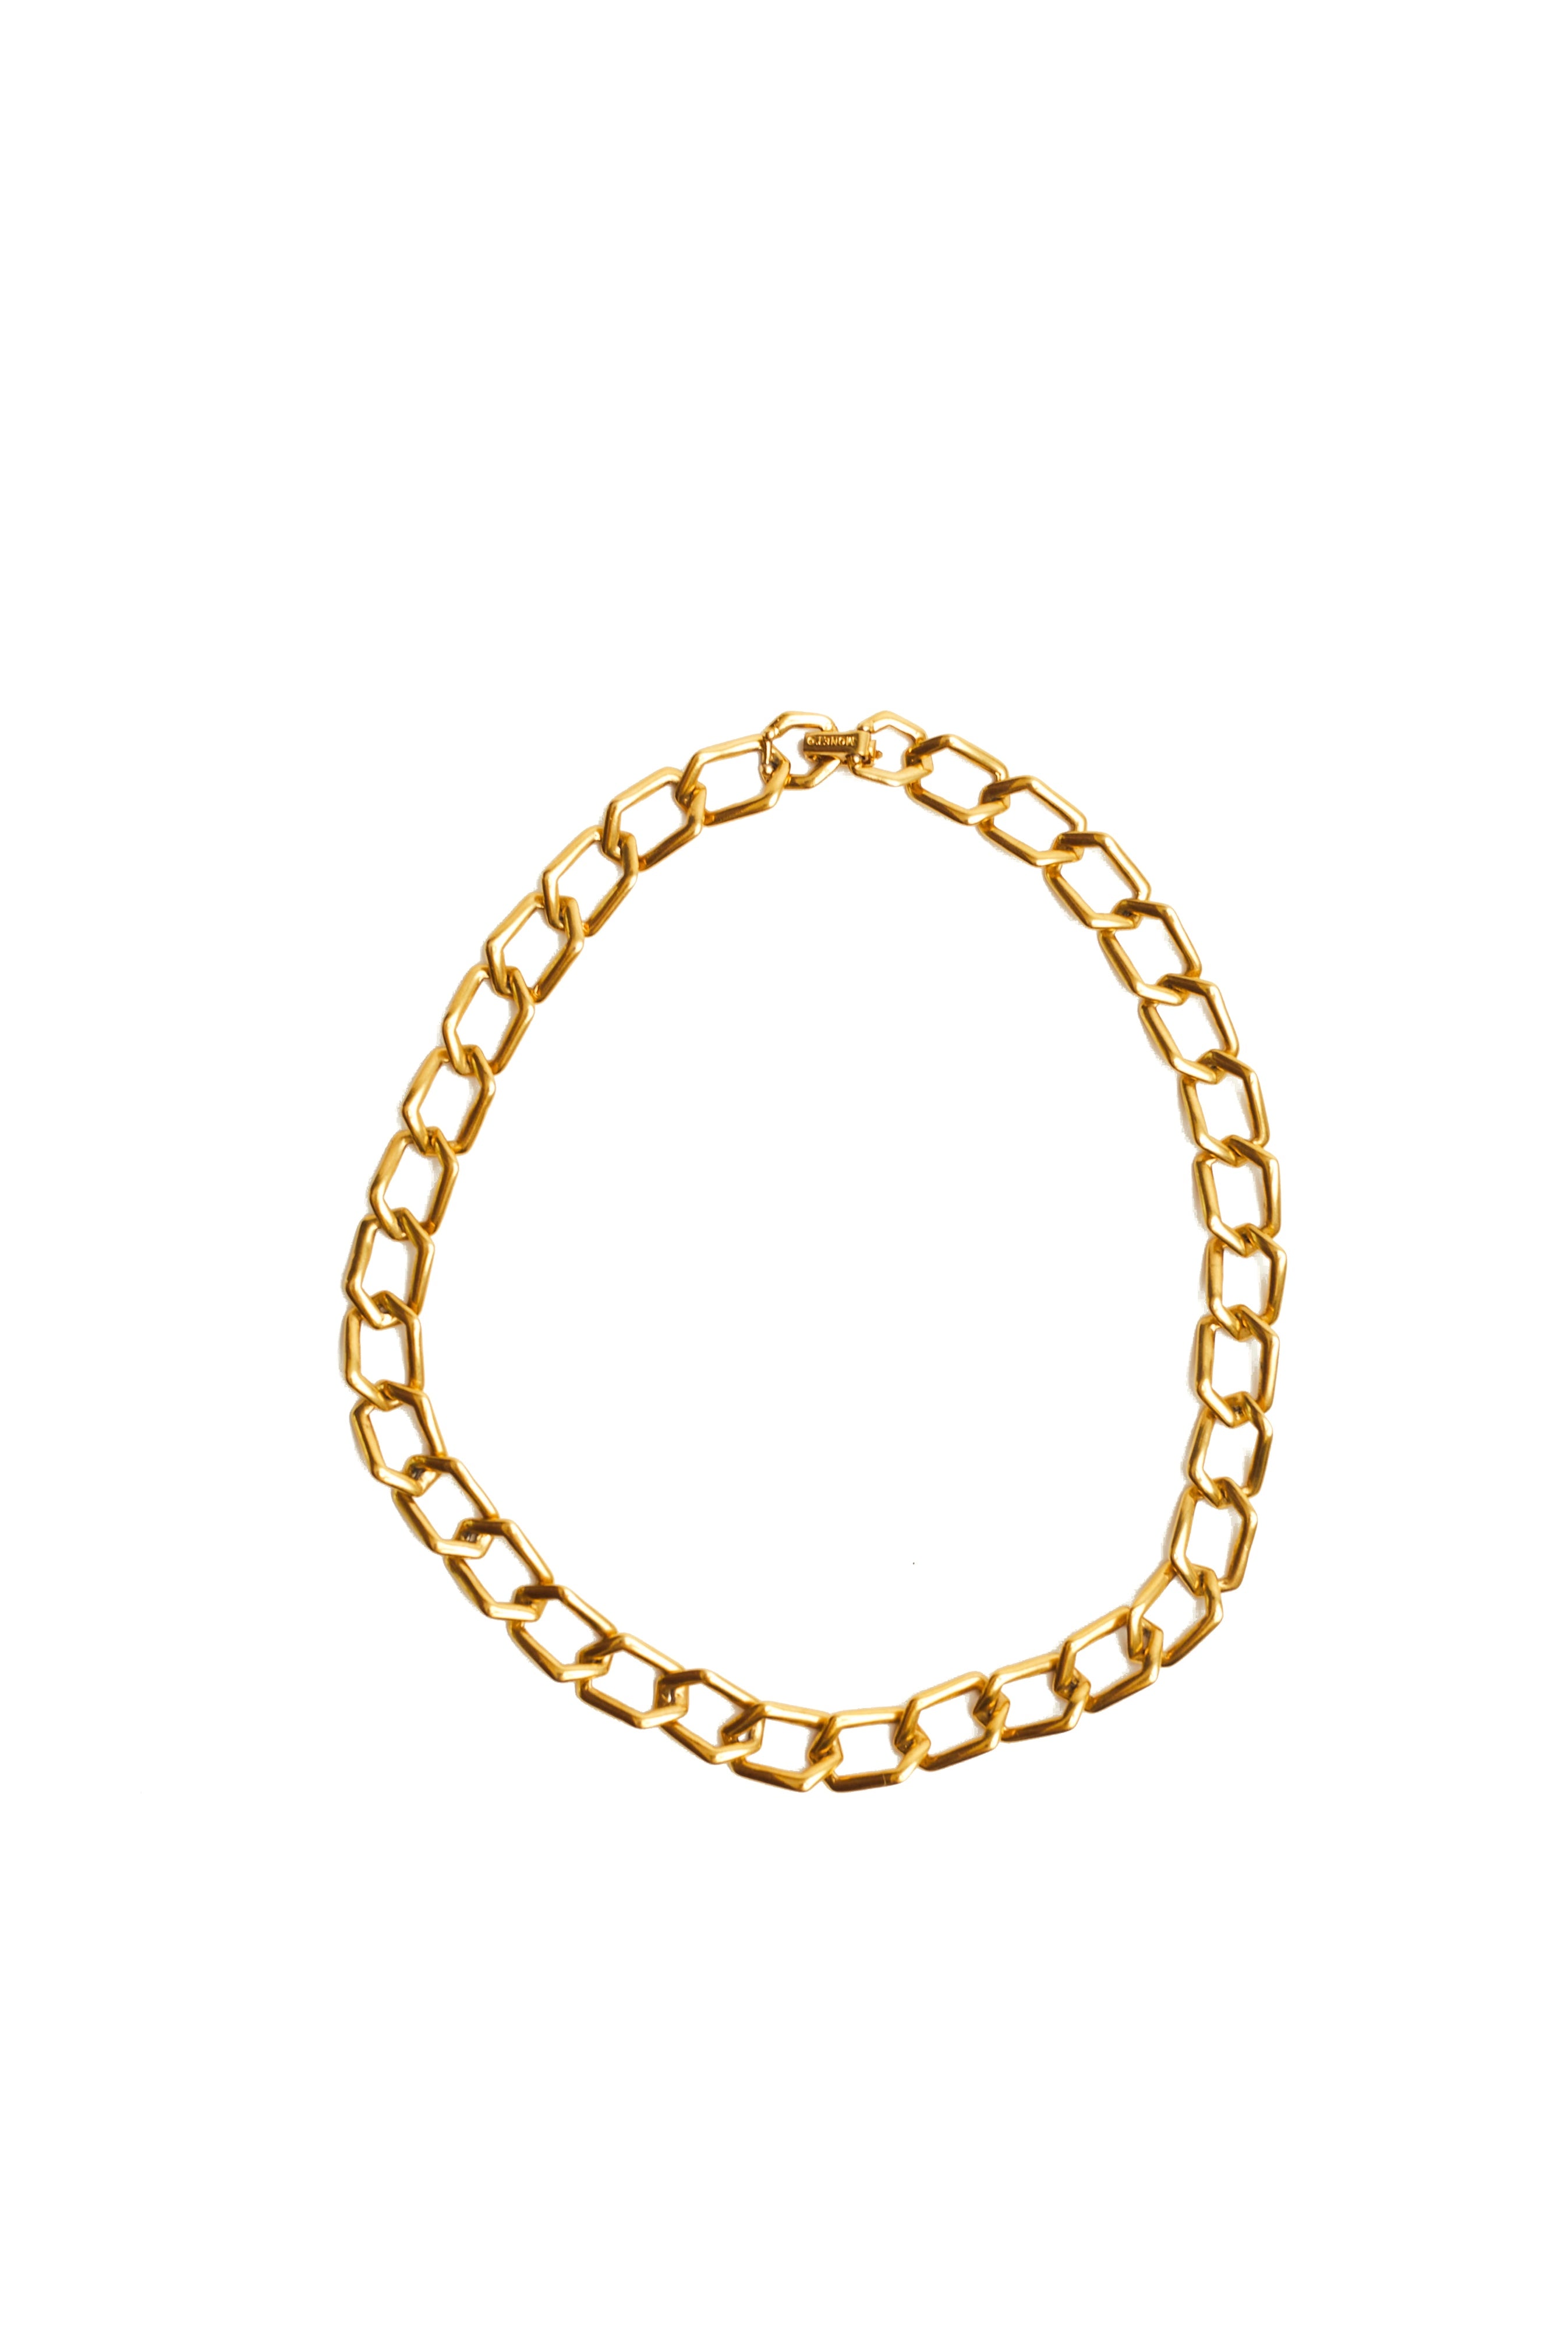 Monet <br> 80's gold plated chain link necklace